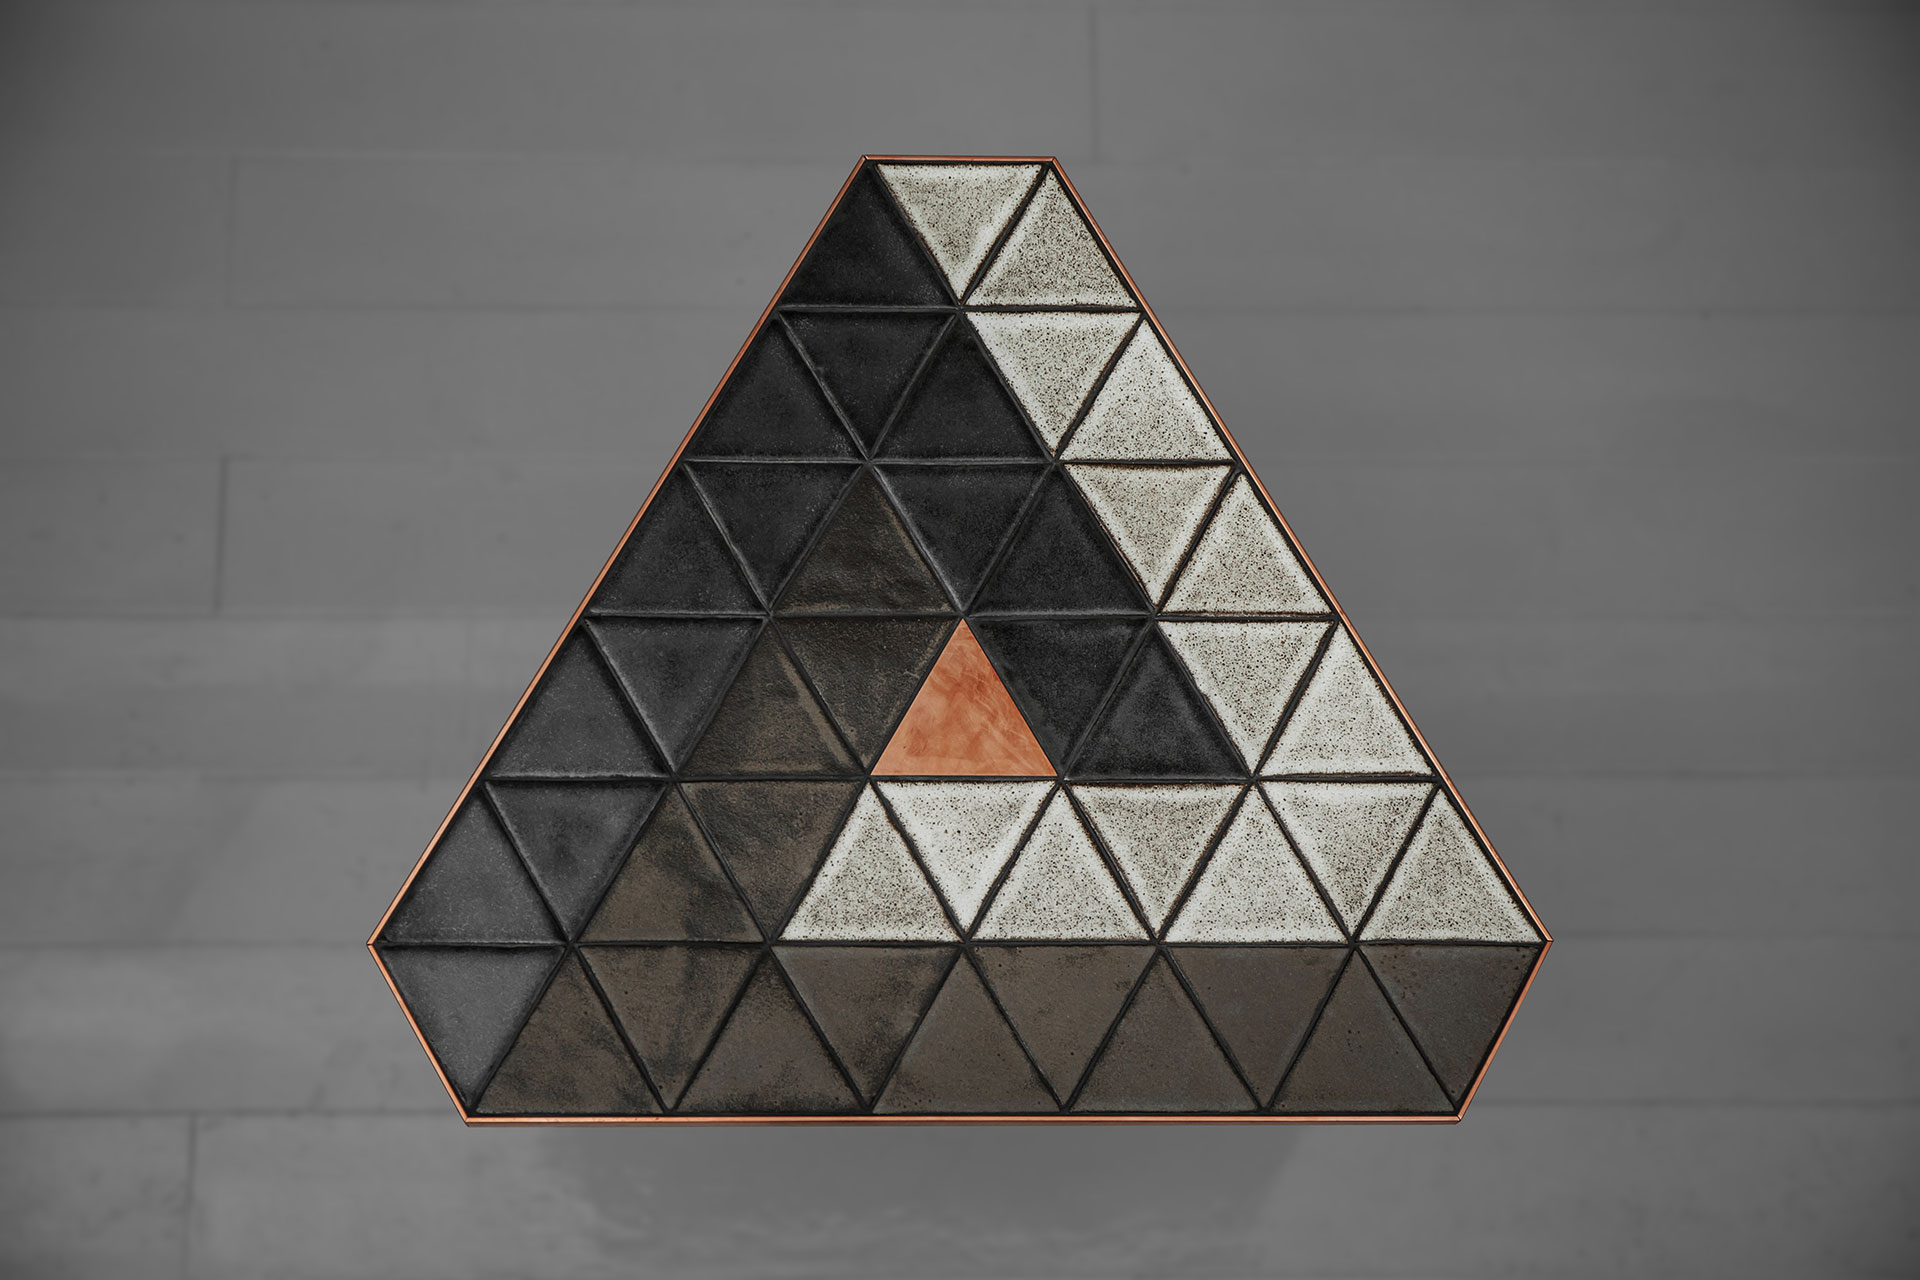 Ceramic side table inspired by Penrose triangle